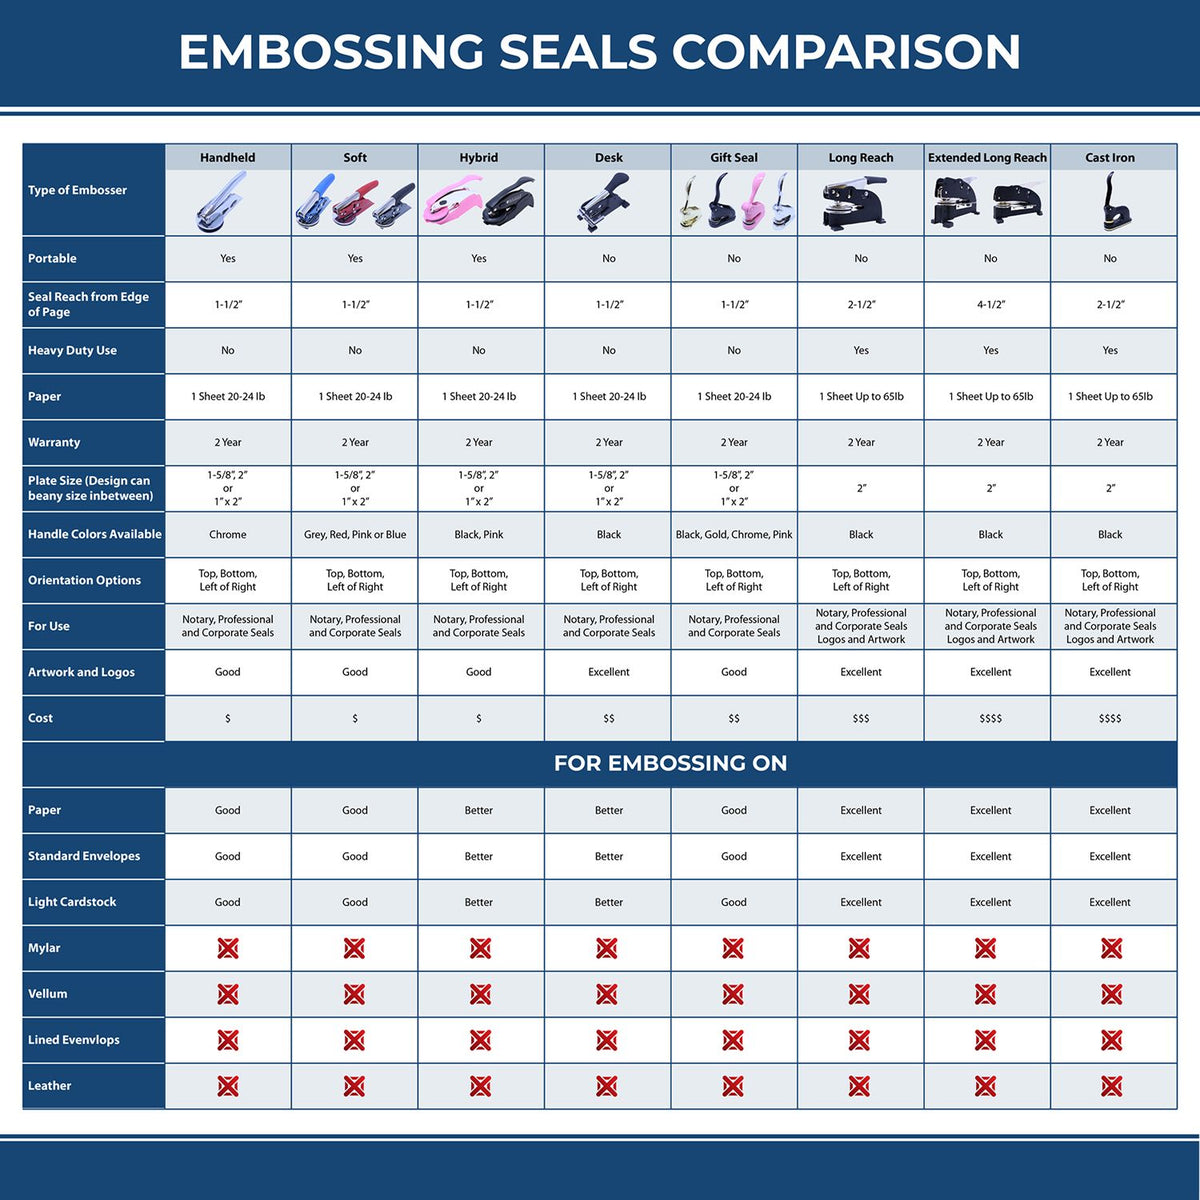 A comparison chart for the different types of mount models available for the Heavy Duty Cast Iron Utah Geologist Seal Embosser